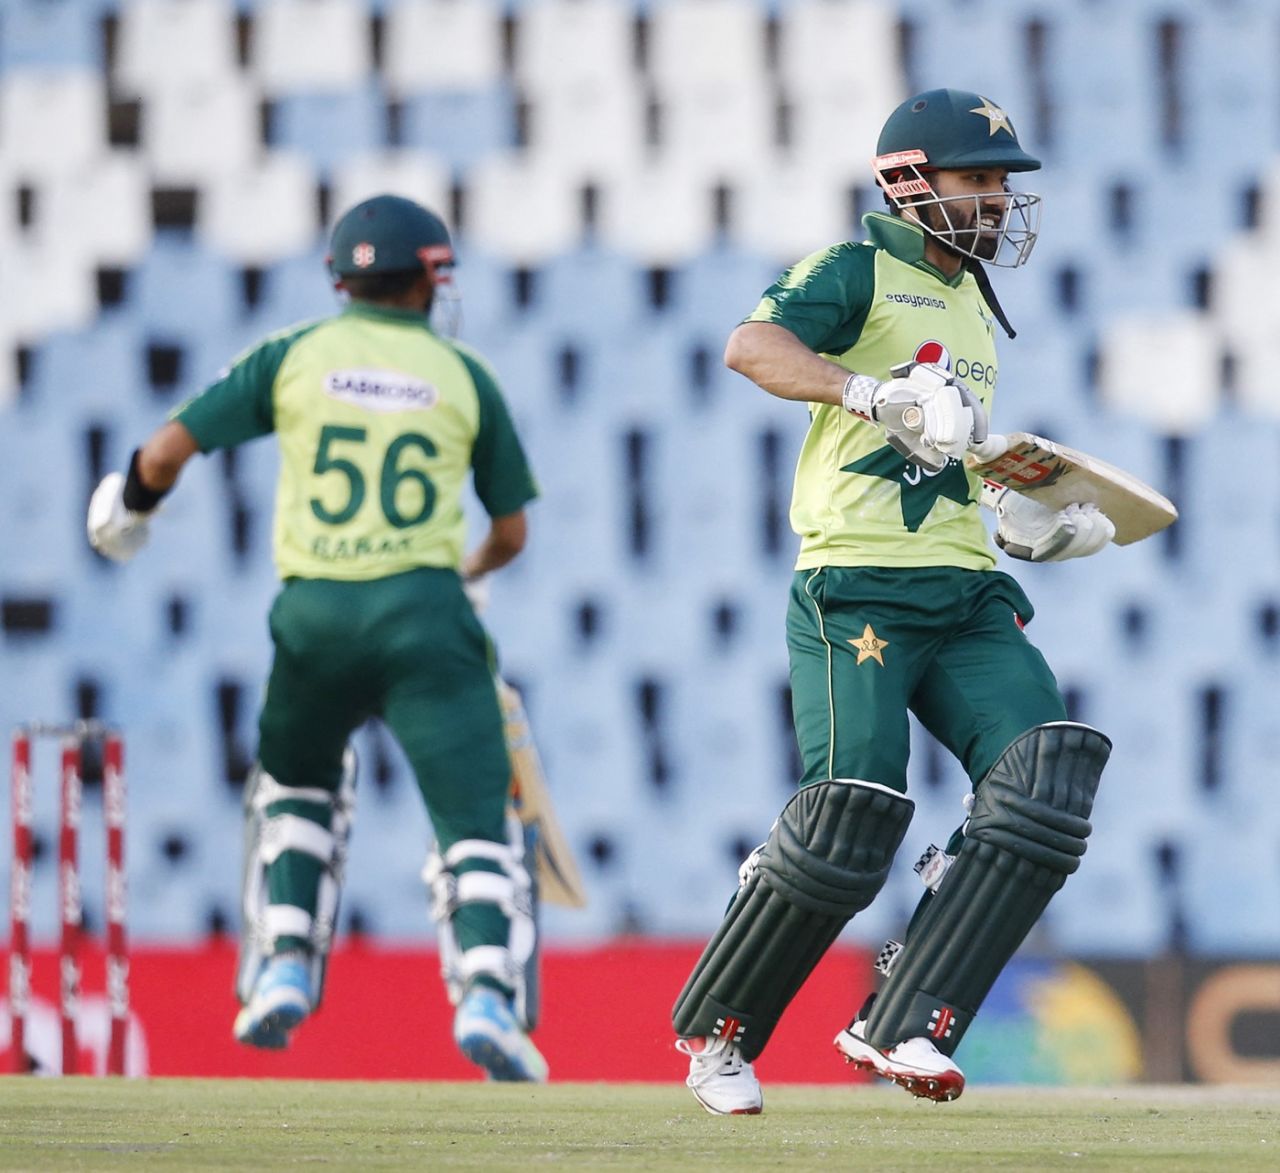 Mohammad Rizwan and Babar Azam steal a single, South Africa vs Pakistan, 3rd T20I, Centurion, April 14, 2021r